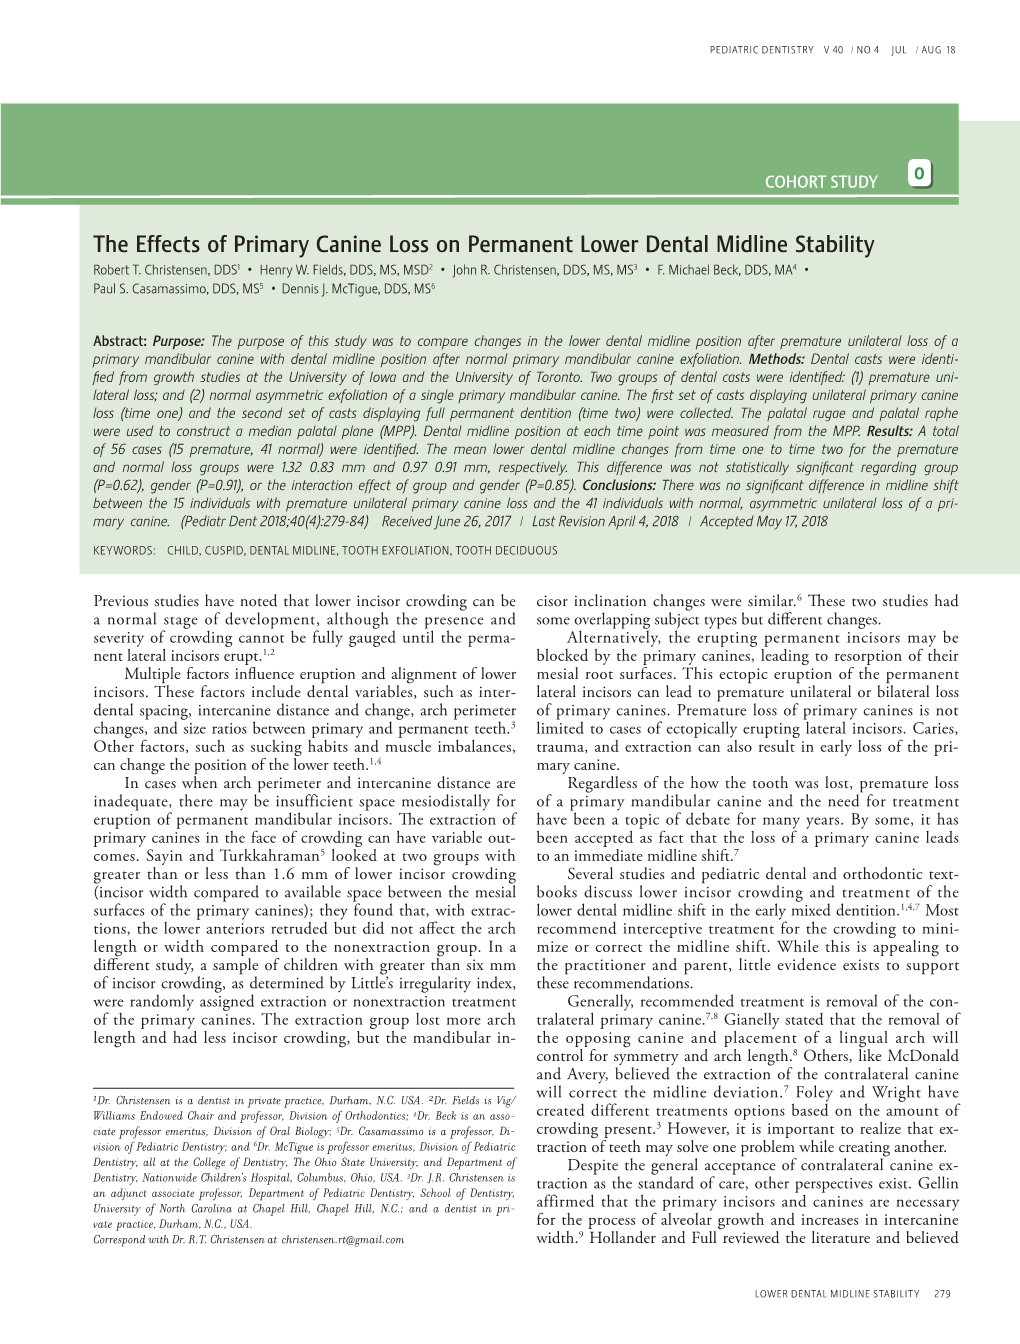 The Effects of Primary Canine Loss on Permanent Lower Dental Midline Stability Robert T